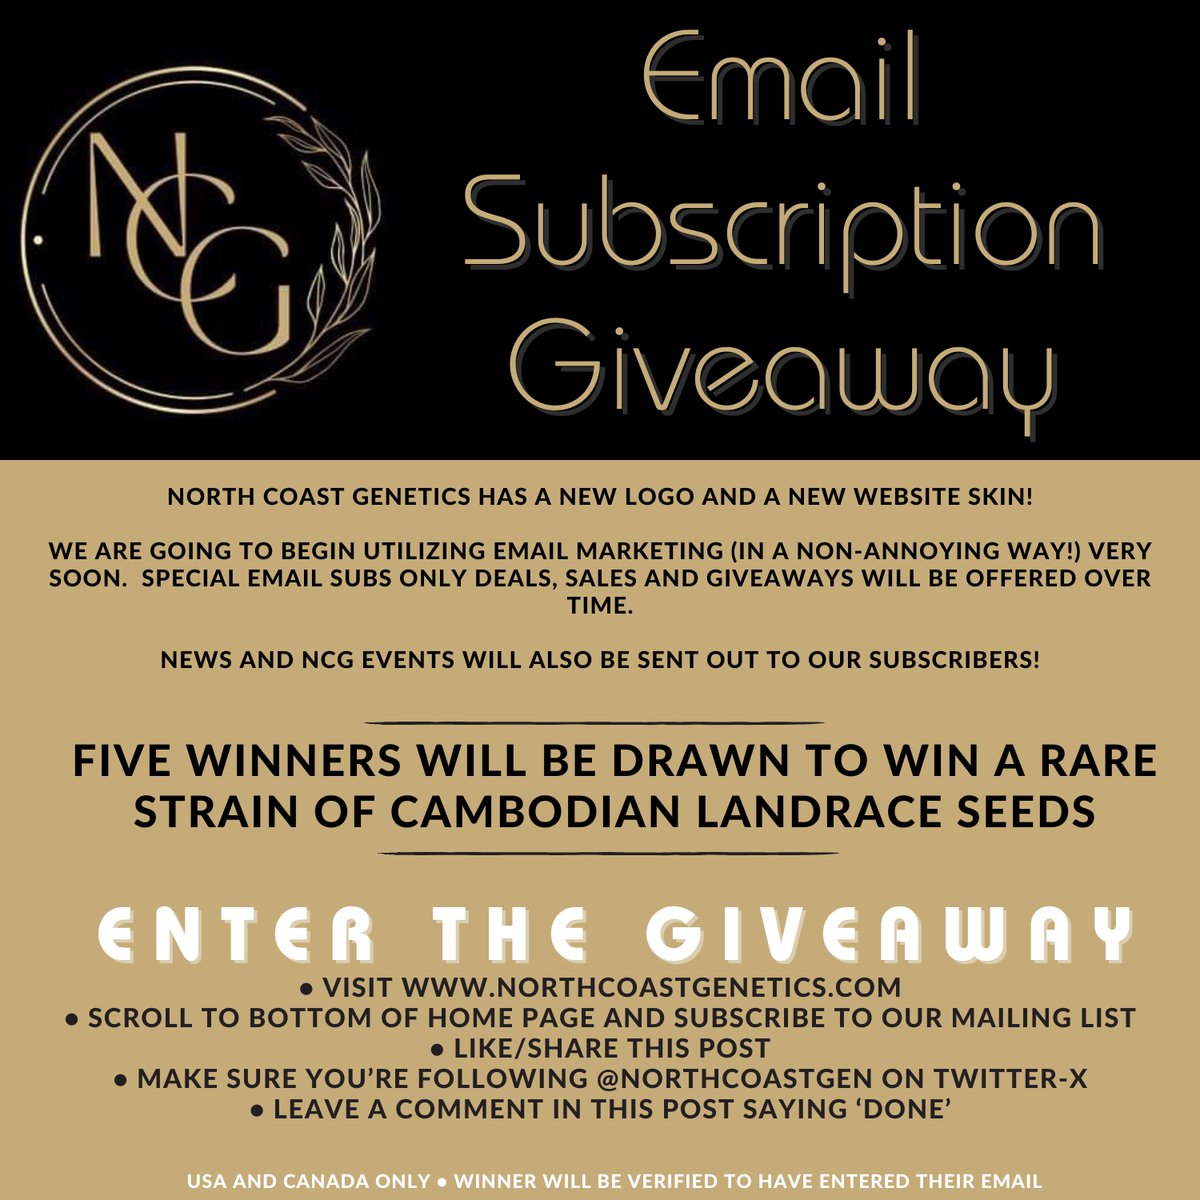 NCG EMAIL SUBSCRIPTION GIVEAWAY! NCG is moving towards bigger things this year! We have a new logo, a new skin on the website, and we will be utilizing email marketing in the near future! Subscribe to our newsletters to be entered in to this giveaway for A RARE STRAIN OF…